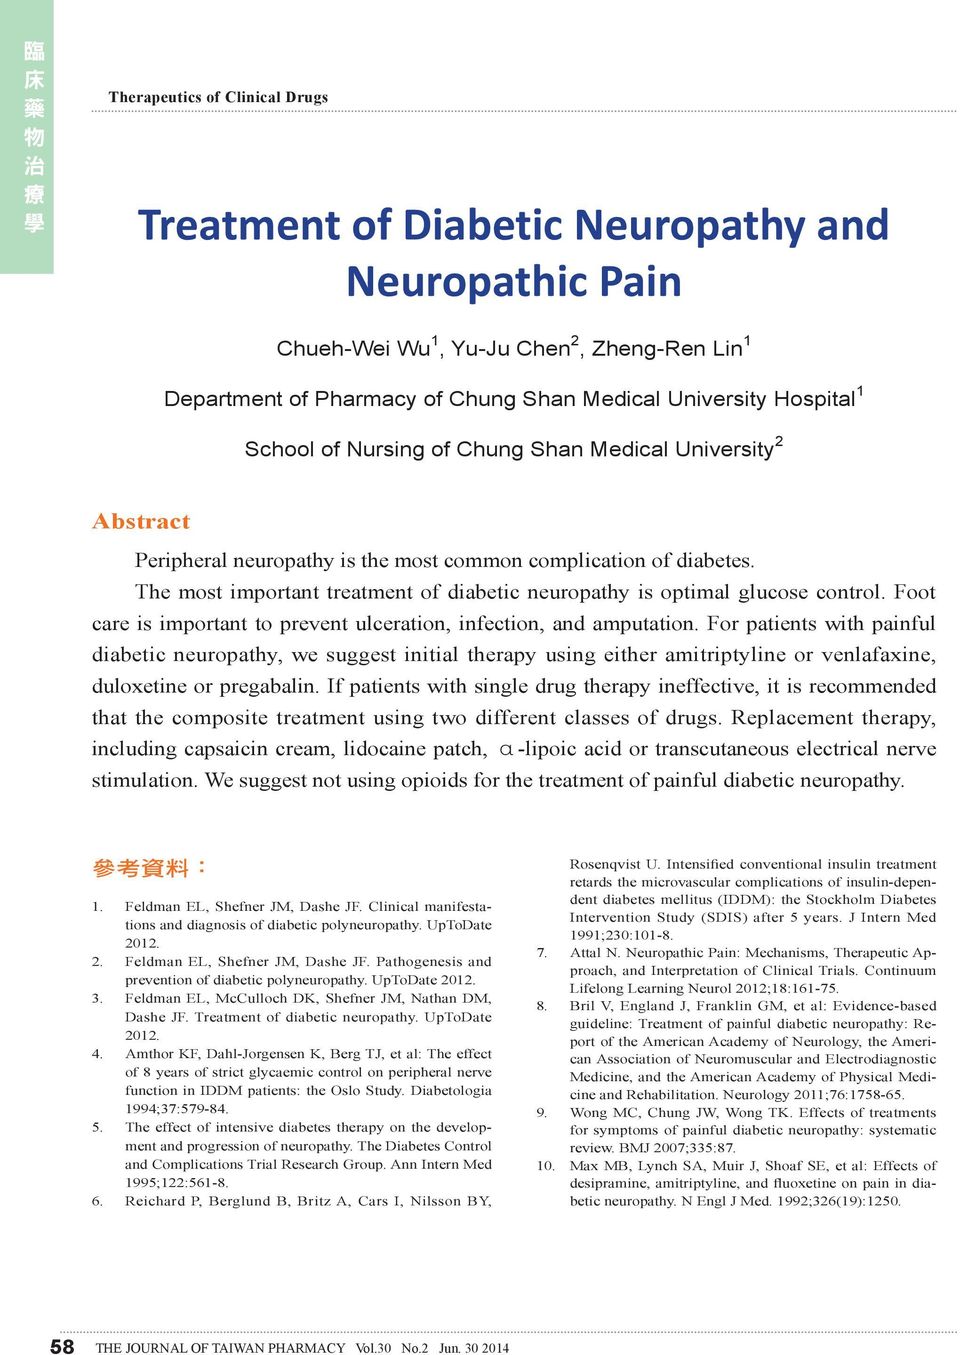 The most important treatment of diabetic neuropathy is optimal glucose control. Foot care is important to prevent ulceration, infection, and amputation.